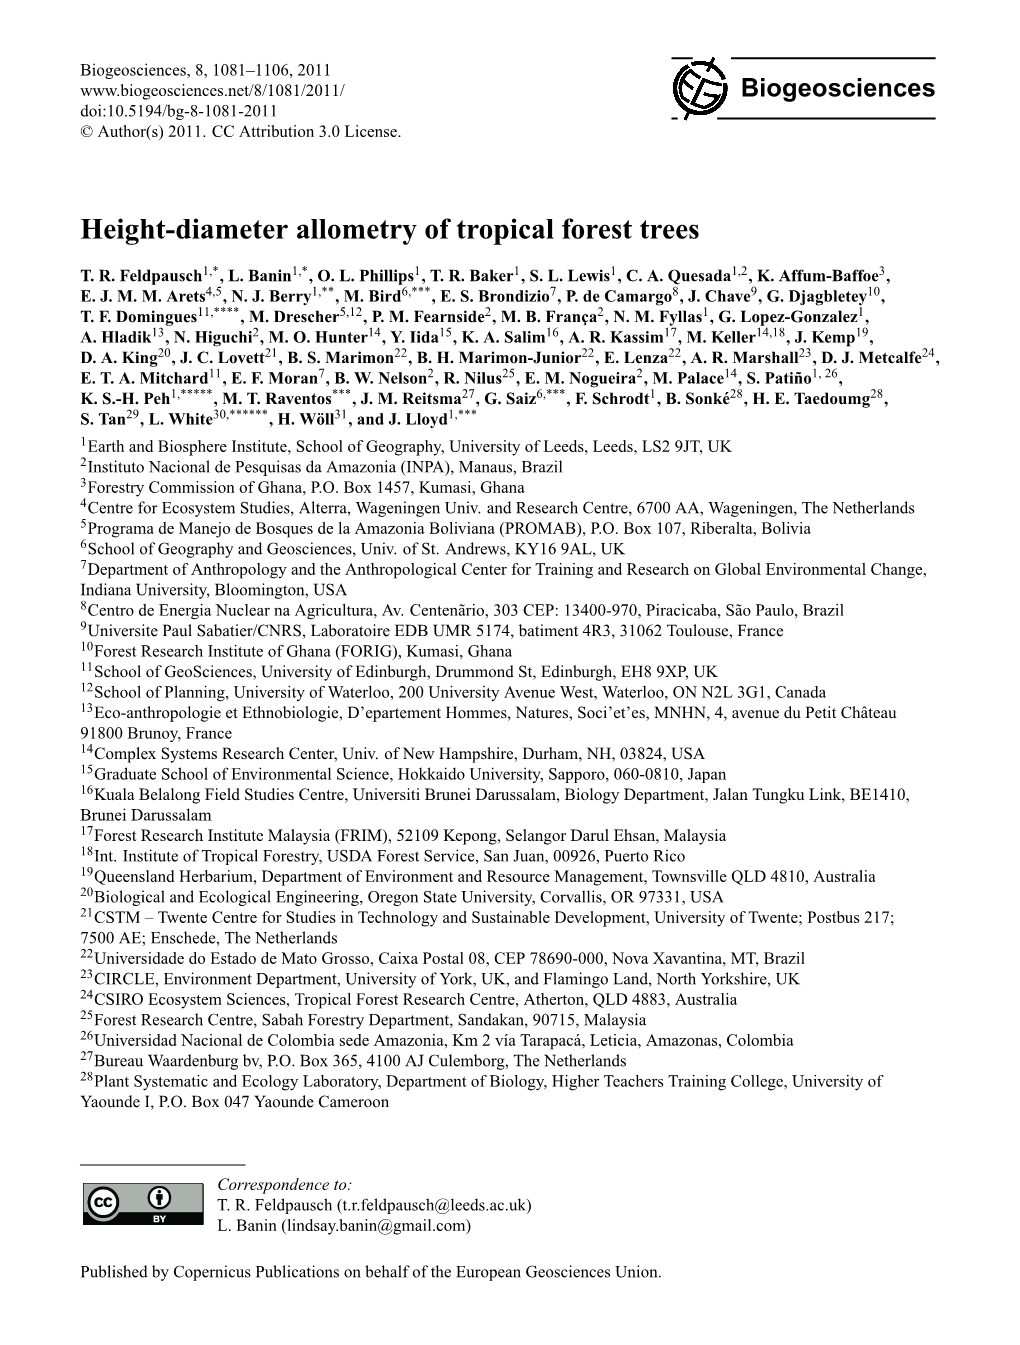 Height-Diameter Allometry of Tropical Forest Trees